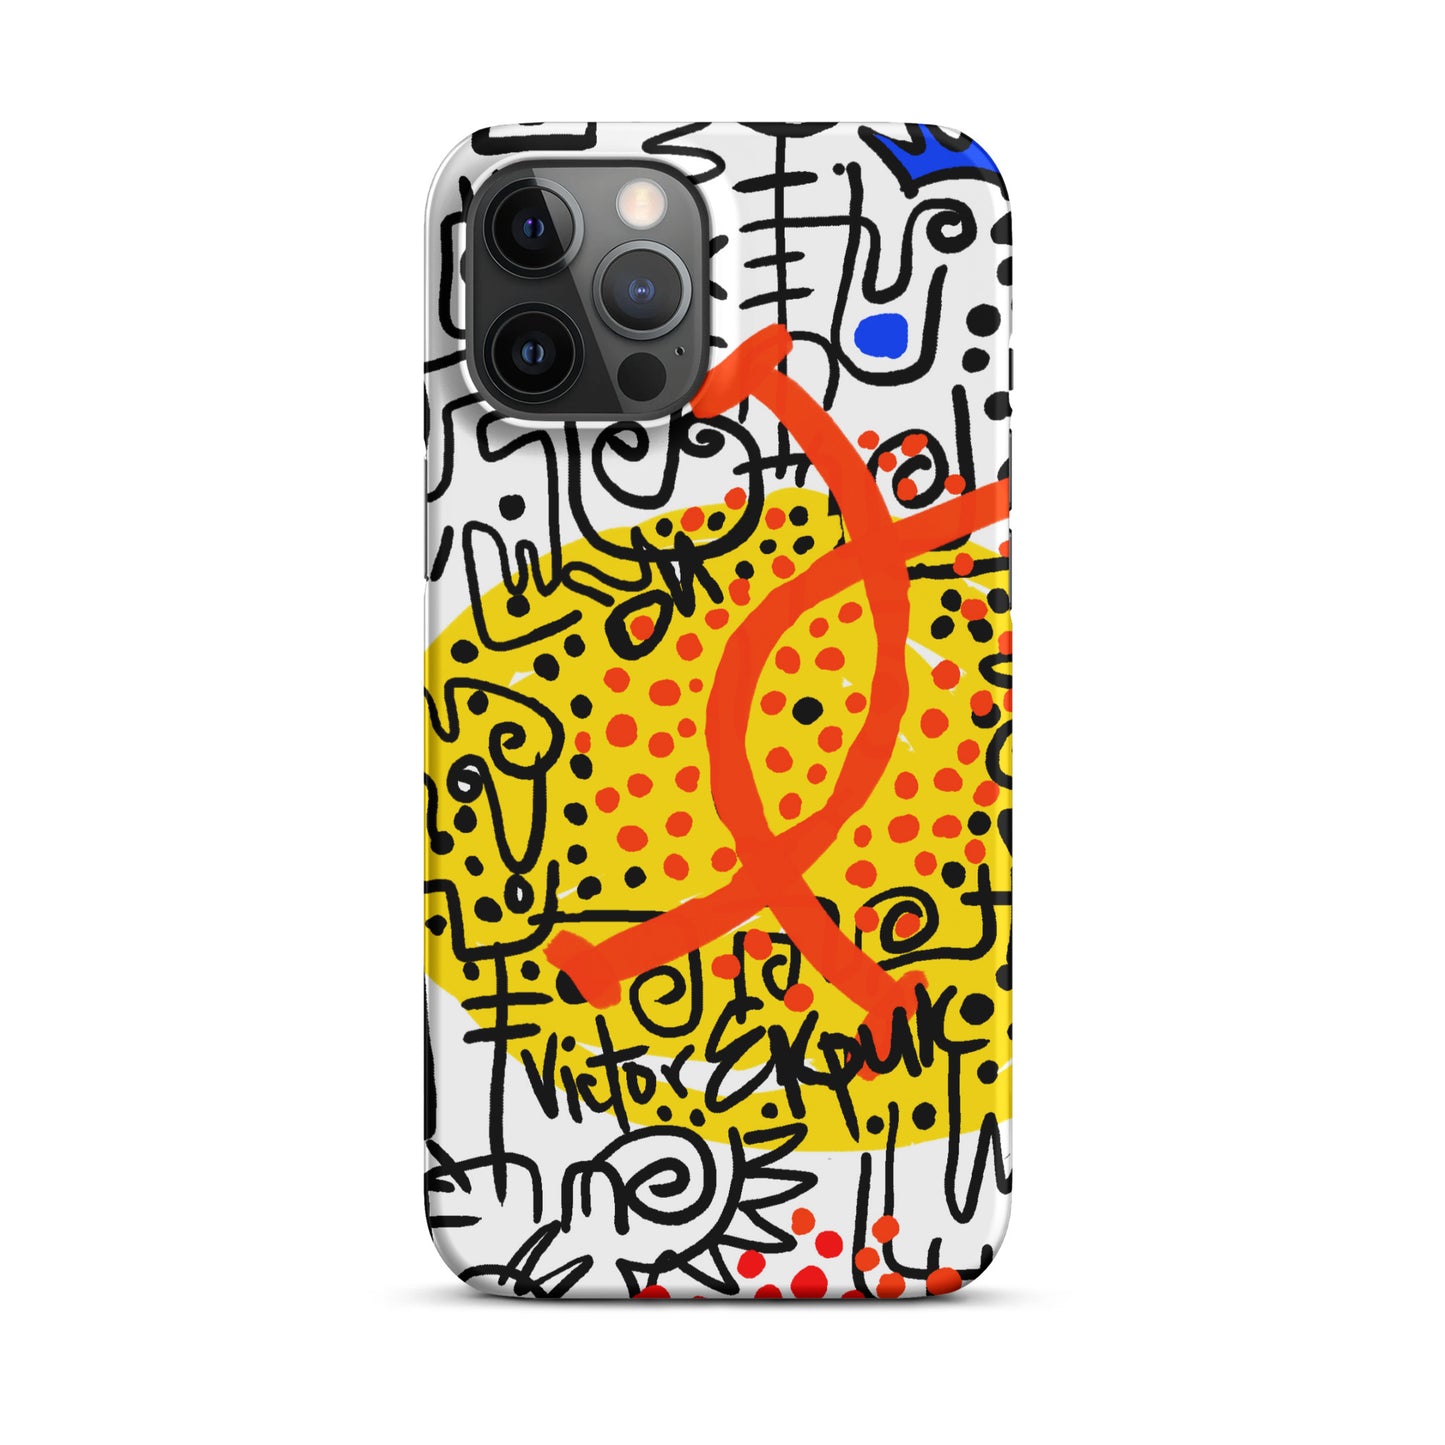 Nsibidi LUV Snap case for iPhone®